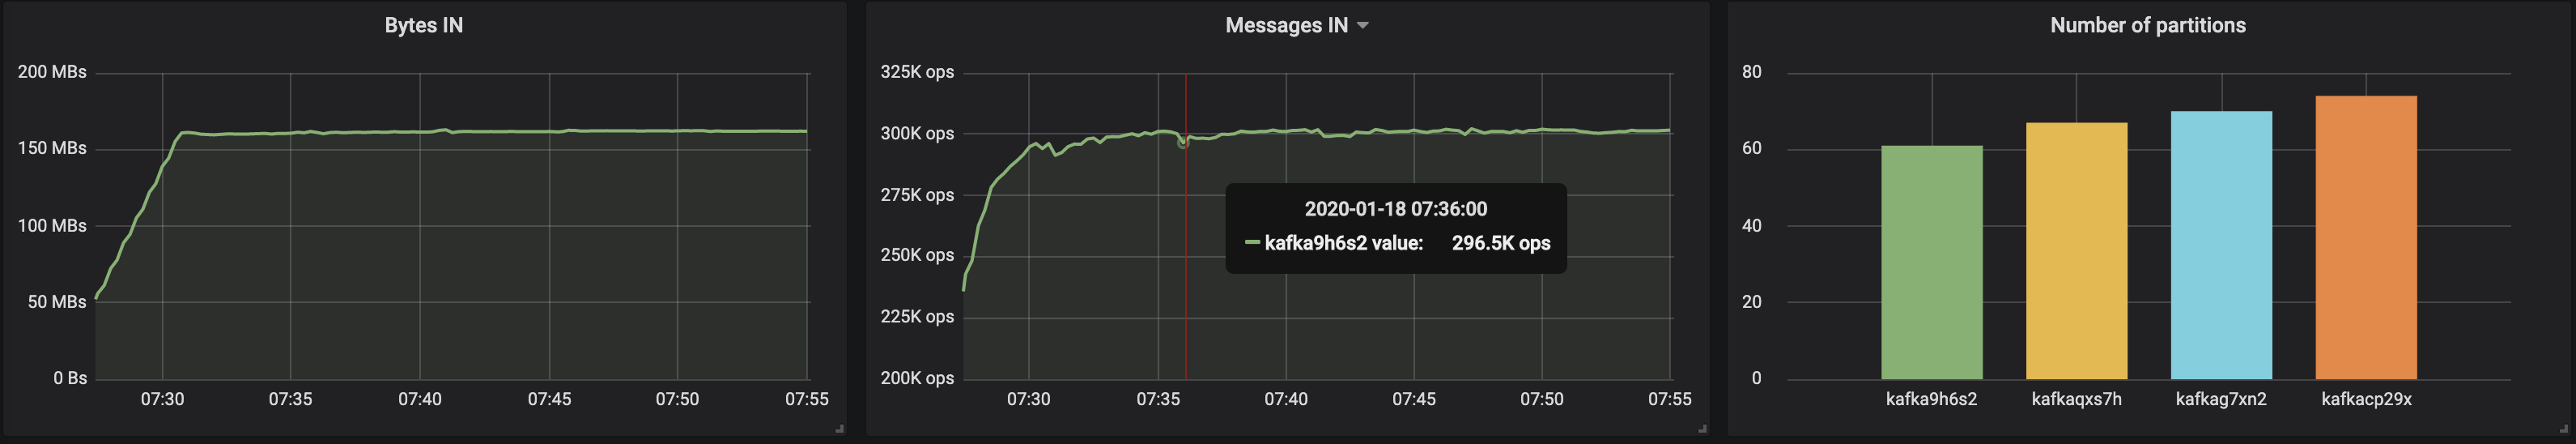 kafka9h6s2 messages in